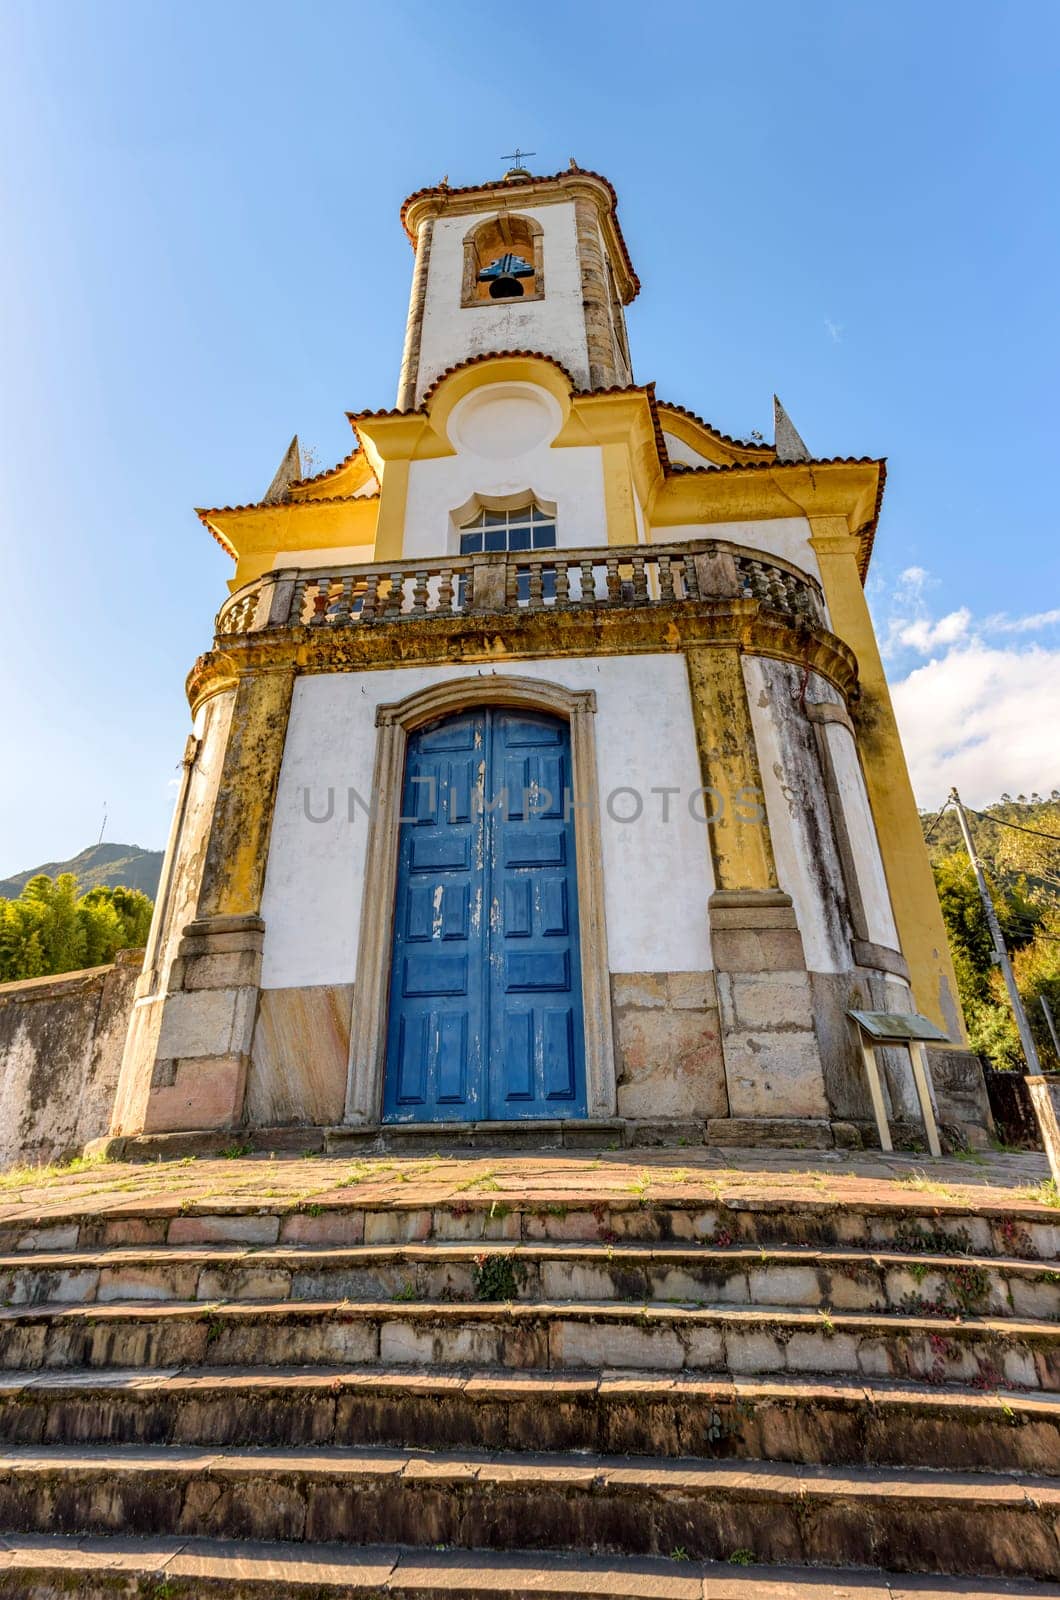 Historic church with its stairs, bell and tower in the city of Ouro Preto in Minas Gerais seen from below